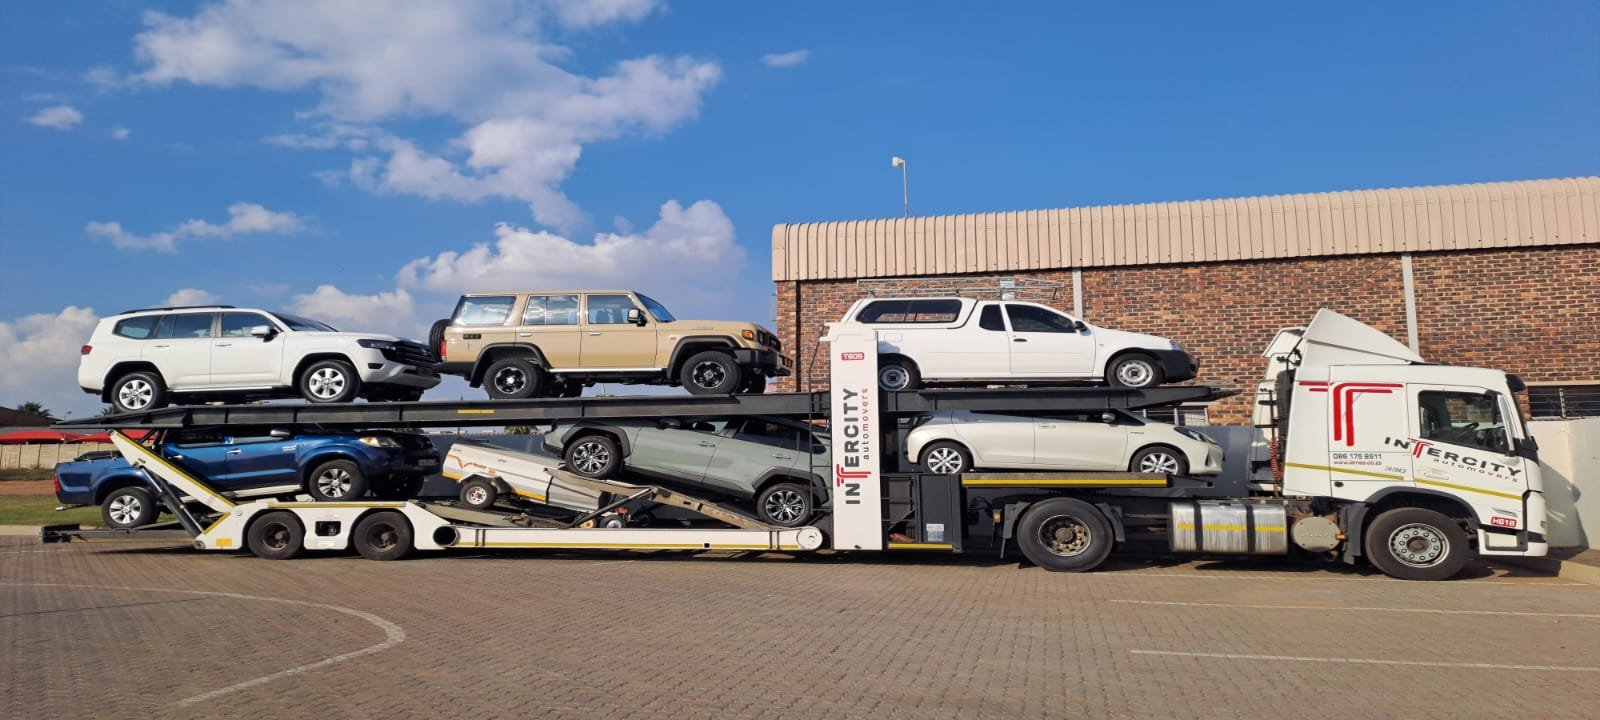 Get the best car transport Today with the top 10 car transport companies in SA